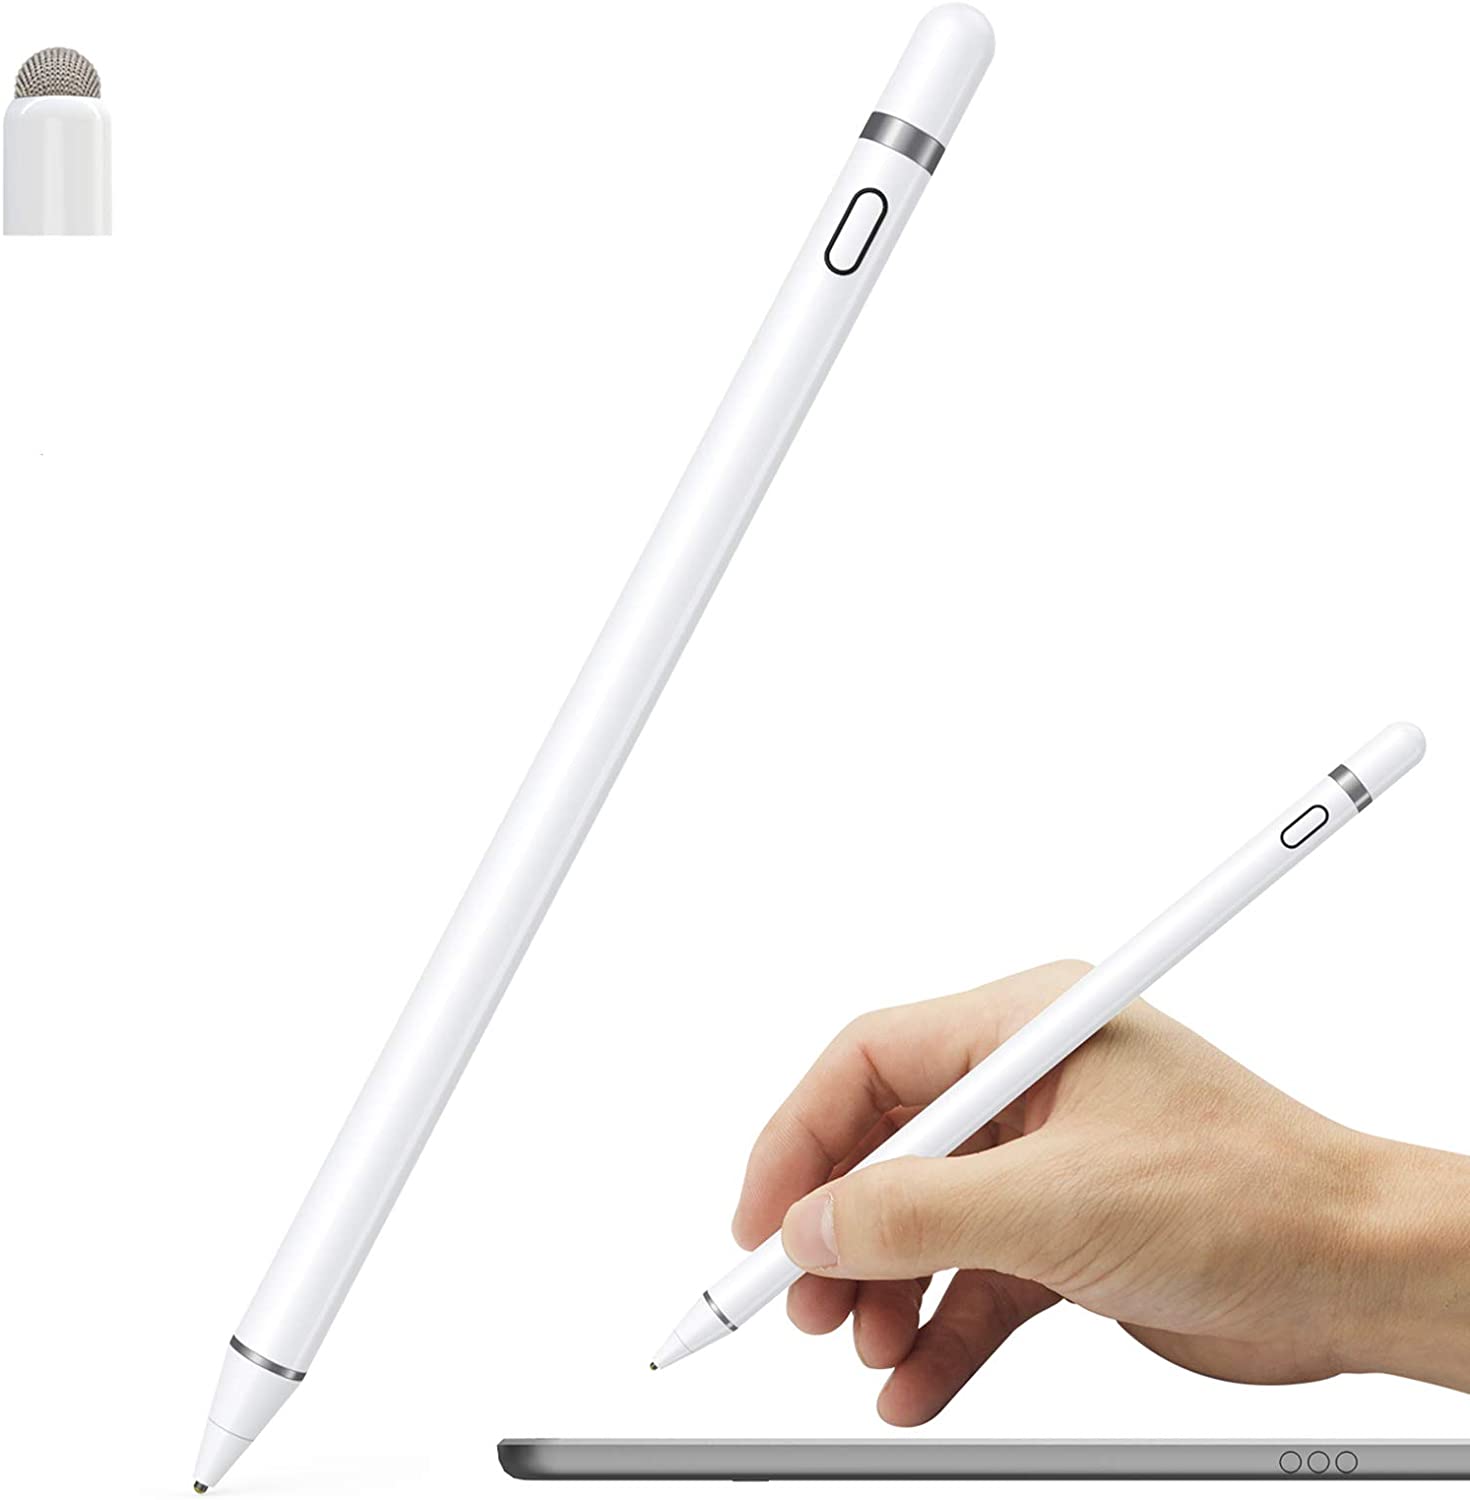 Competitive Price for 2 In 1 Stylus Pen - Active Stylus Pen Compatible for iOS&Android Touch Screens, Pencil for iPad with Dual Touch Function,Rechargeable Stylus for iPad/iPad Pro/Air/Mini/iP...